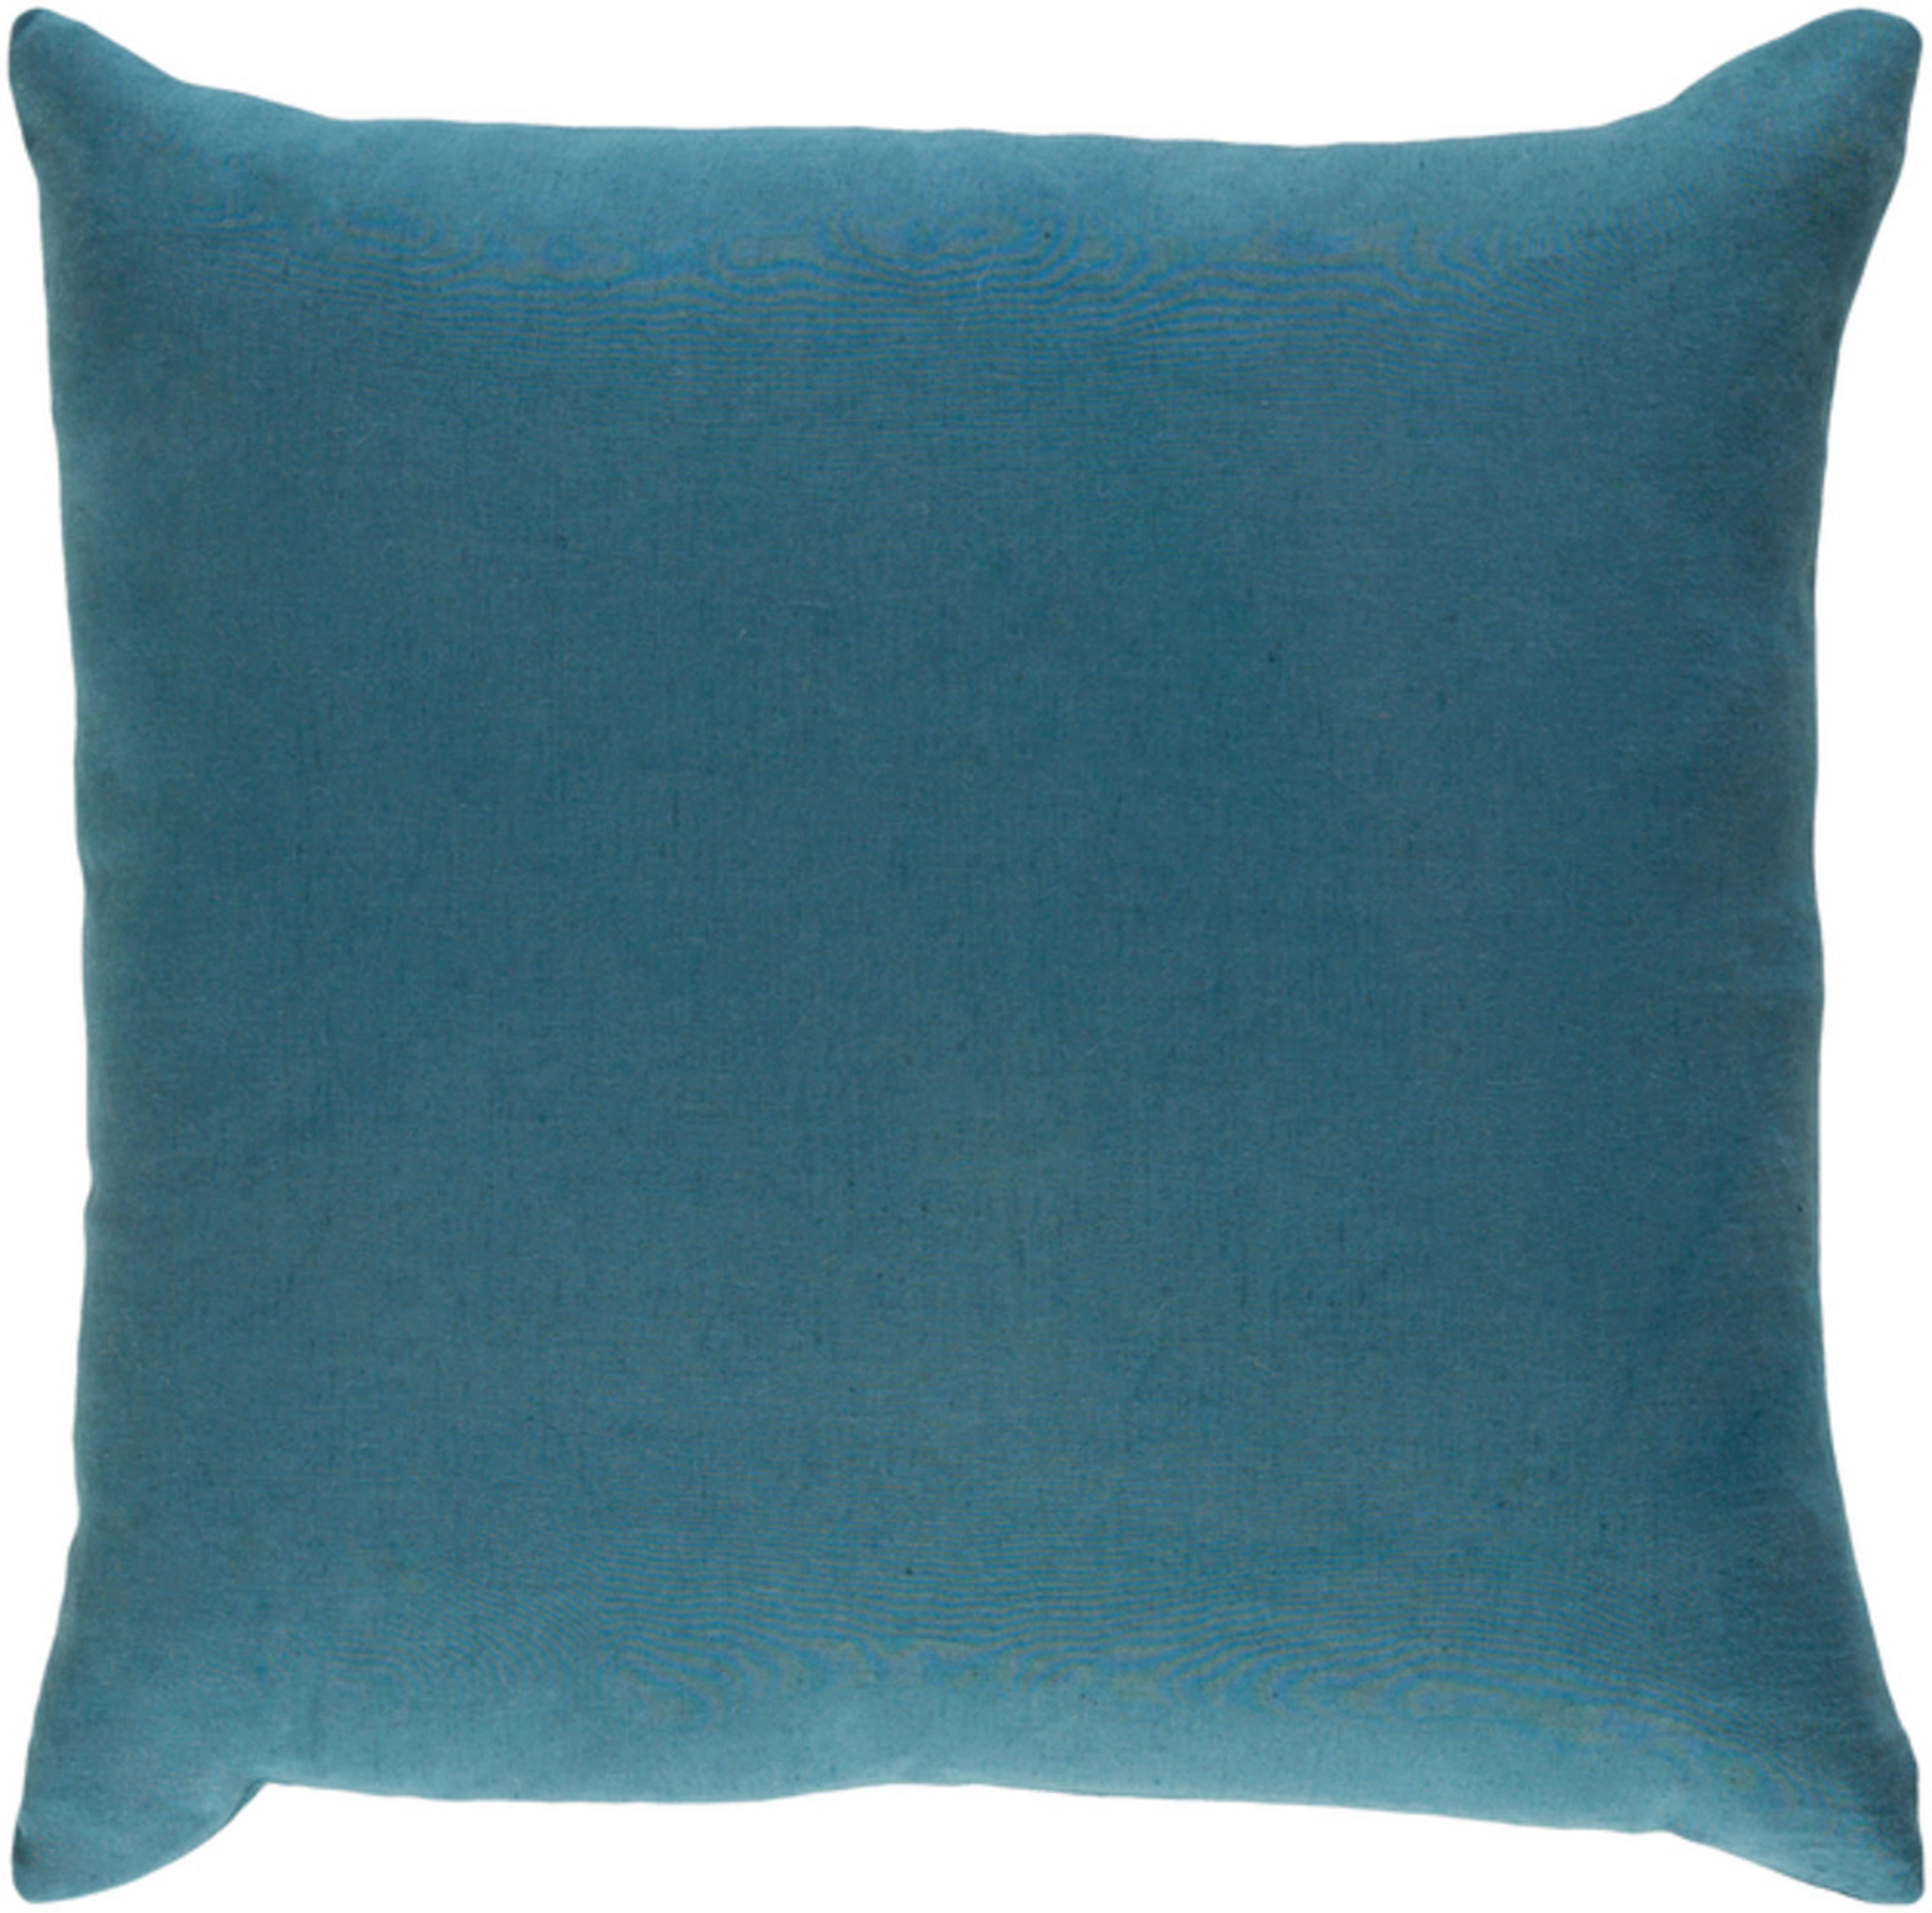 Ethiopia - ETPA-7212 - 18" x 18" - pillow cover only - Surya